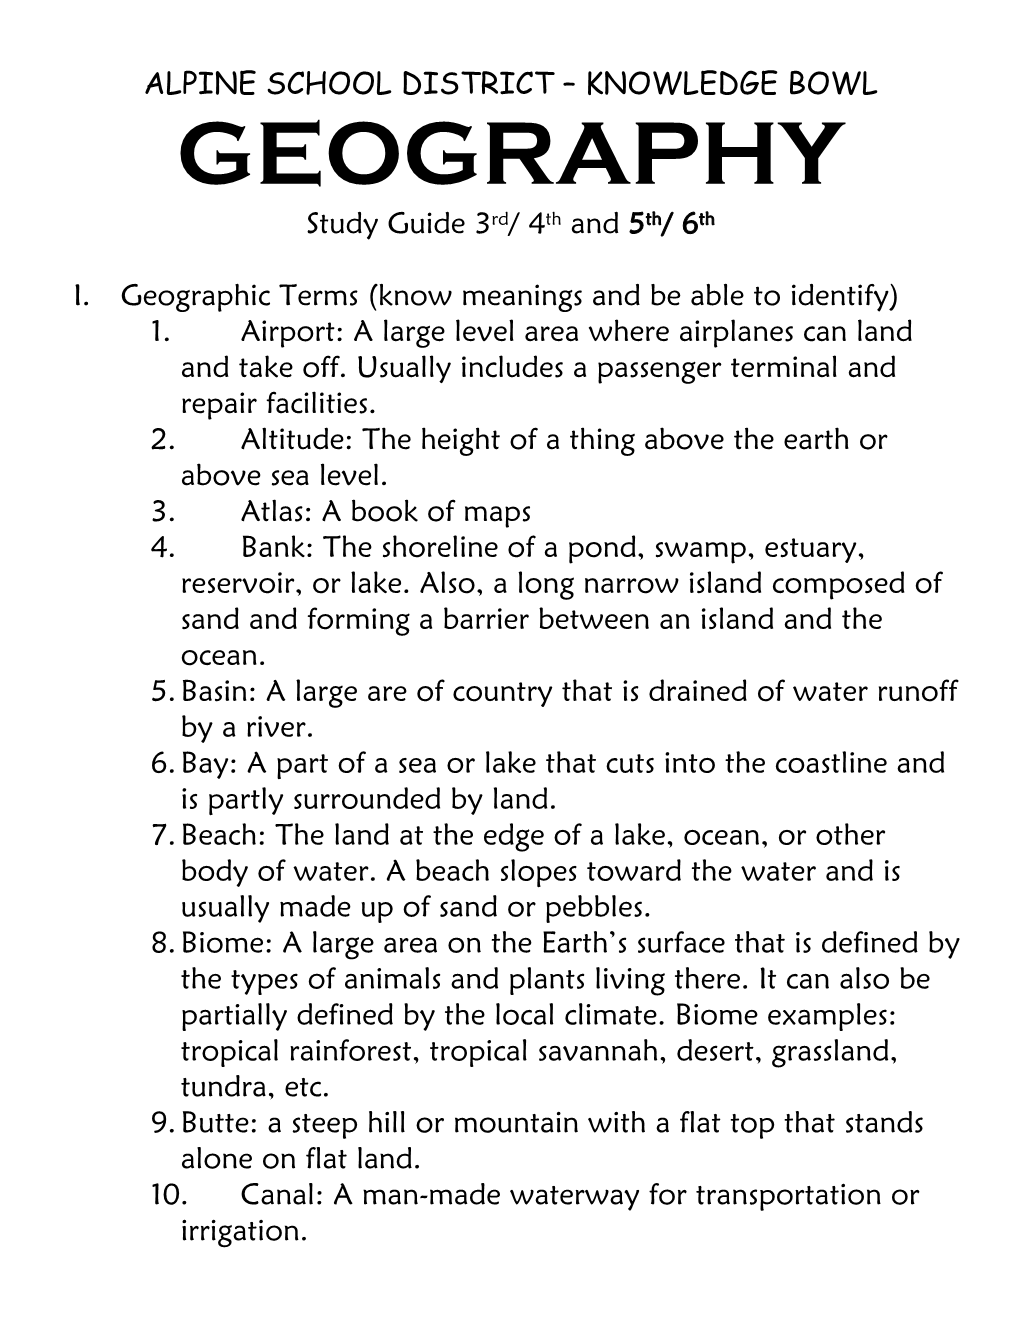 GEOGRAPHY Study Guide 3Rd/ 4Th and 5Th/ 6Th